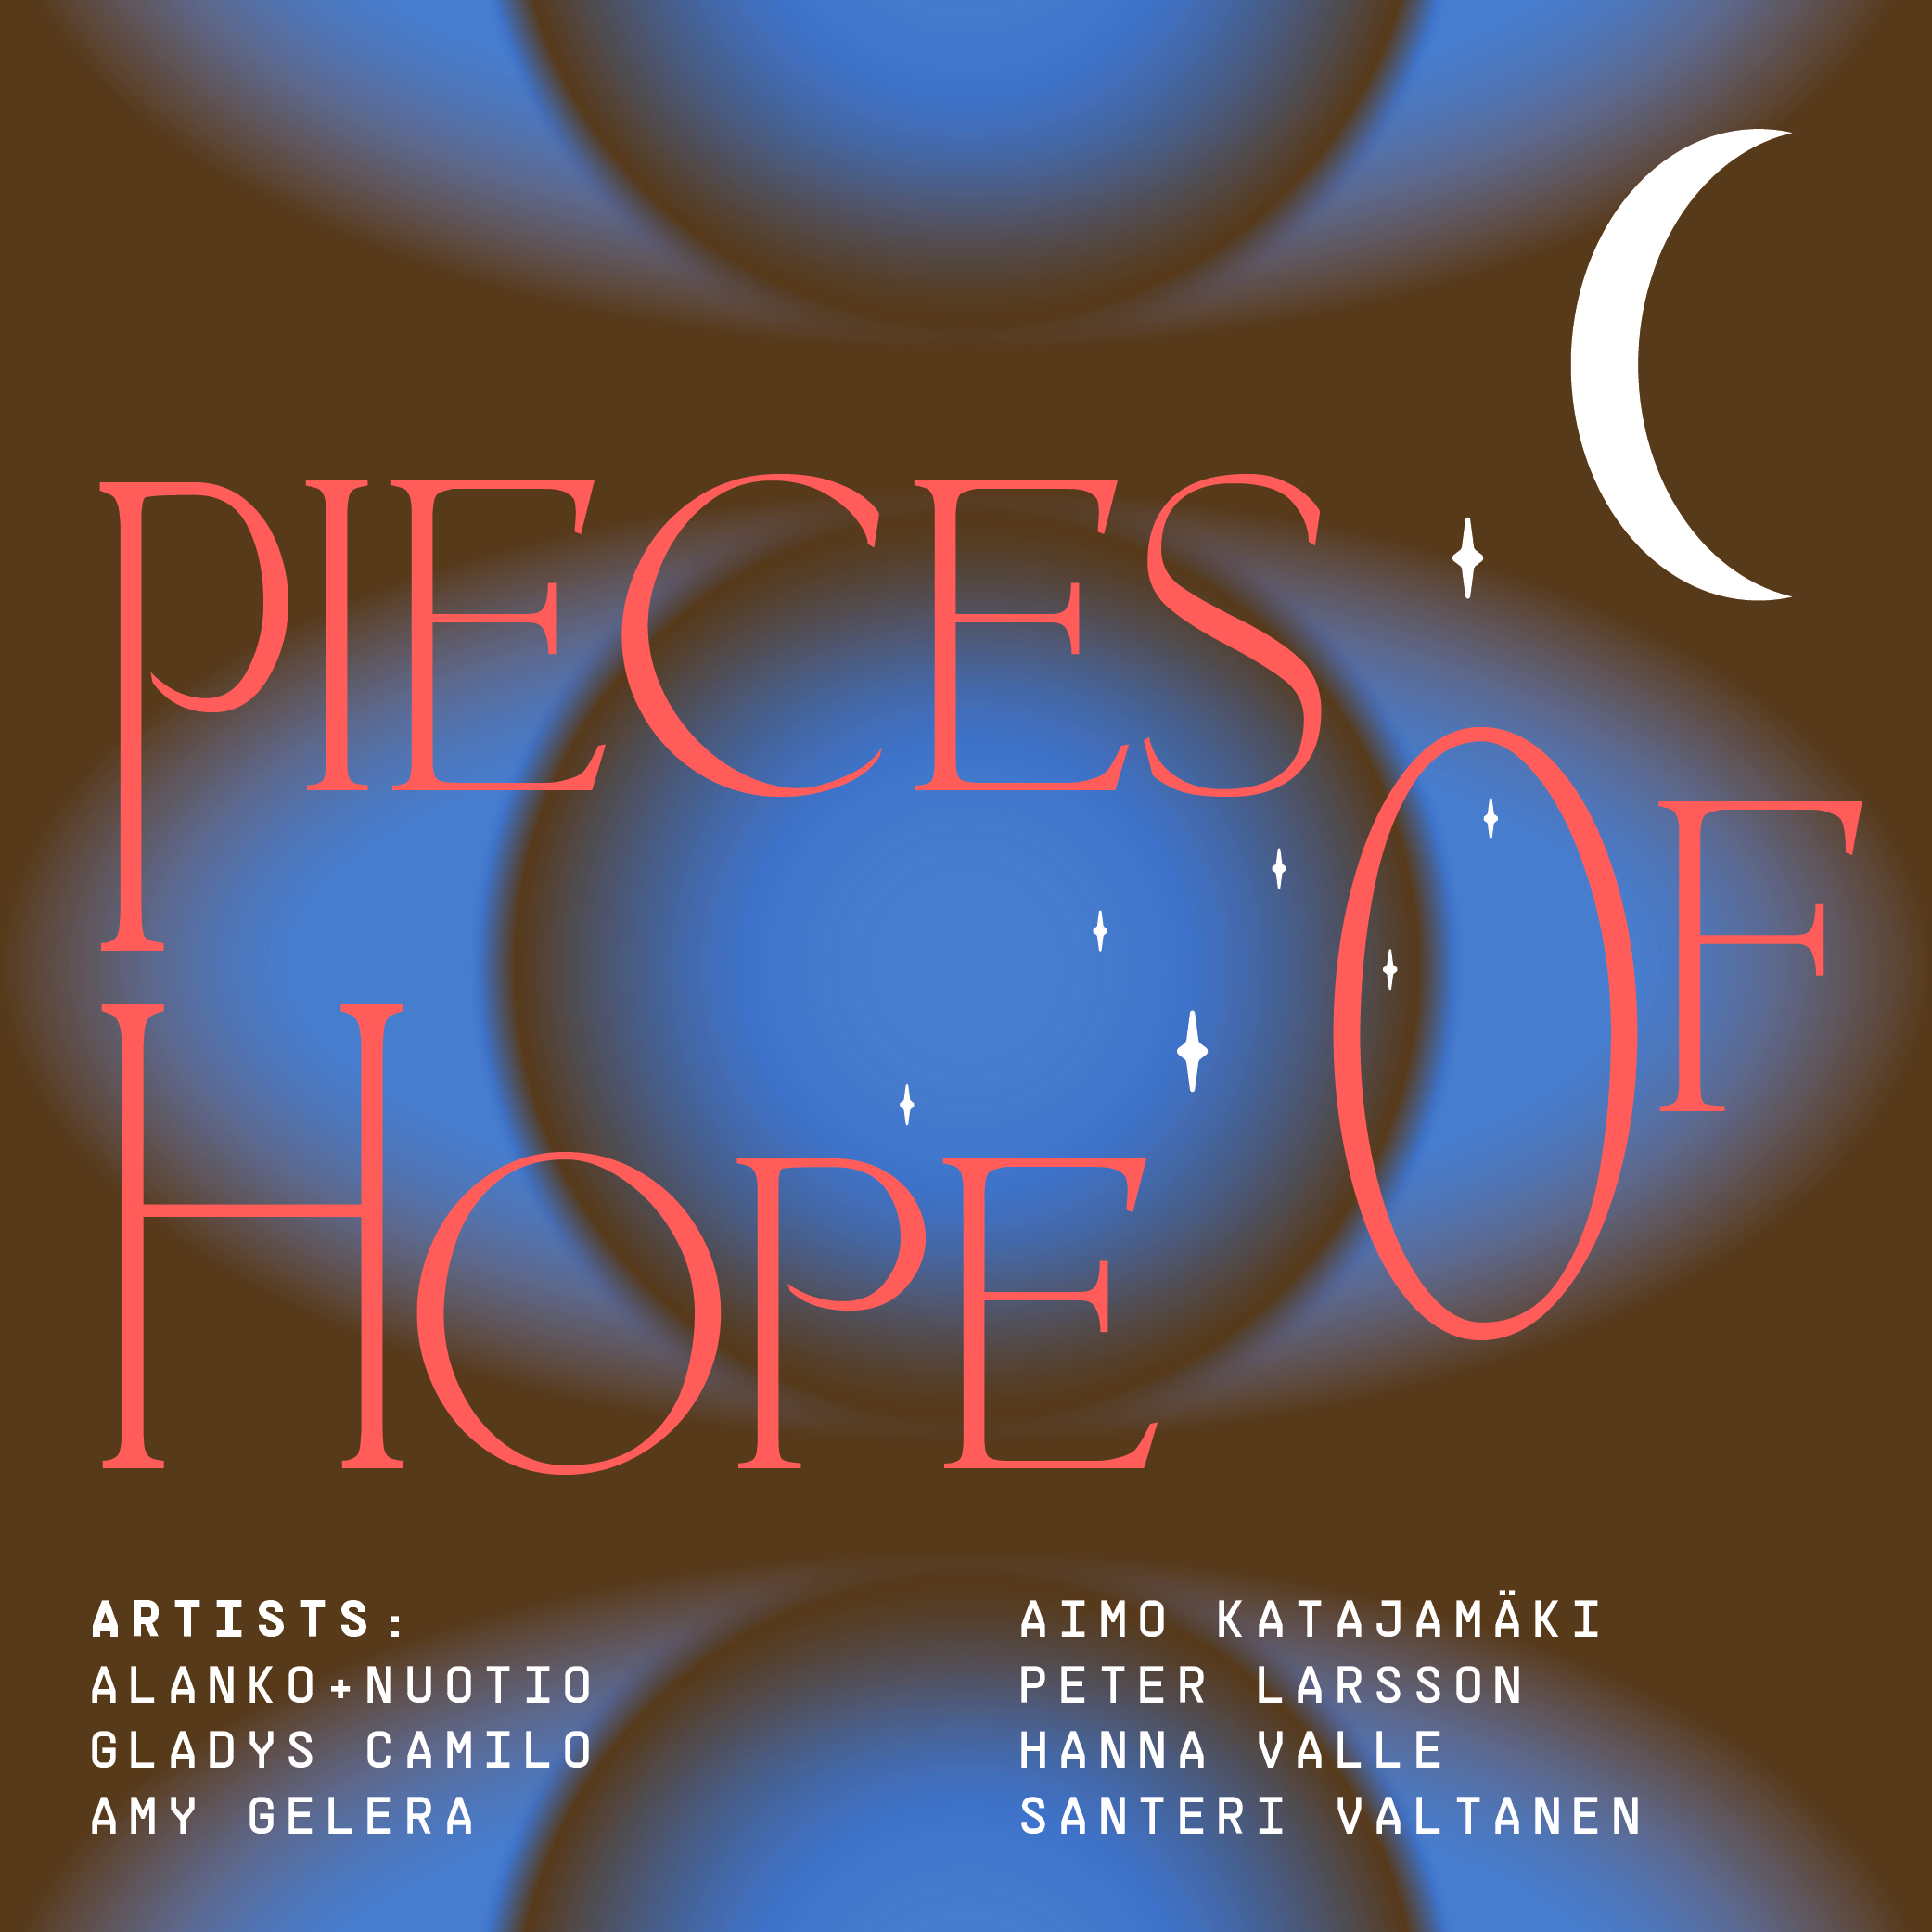 Pieces of Hope -collective